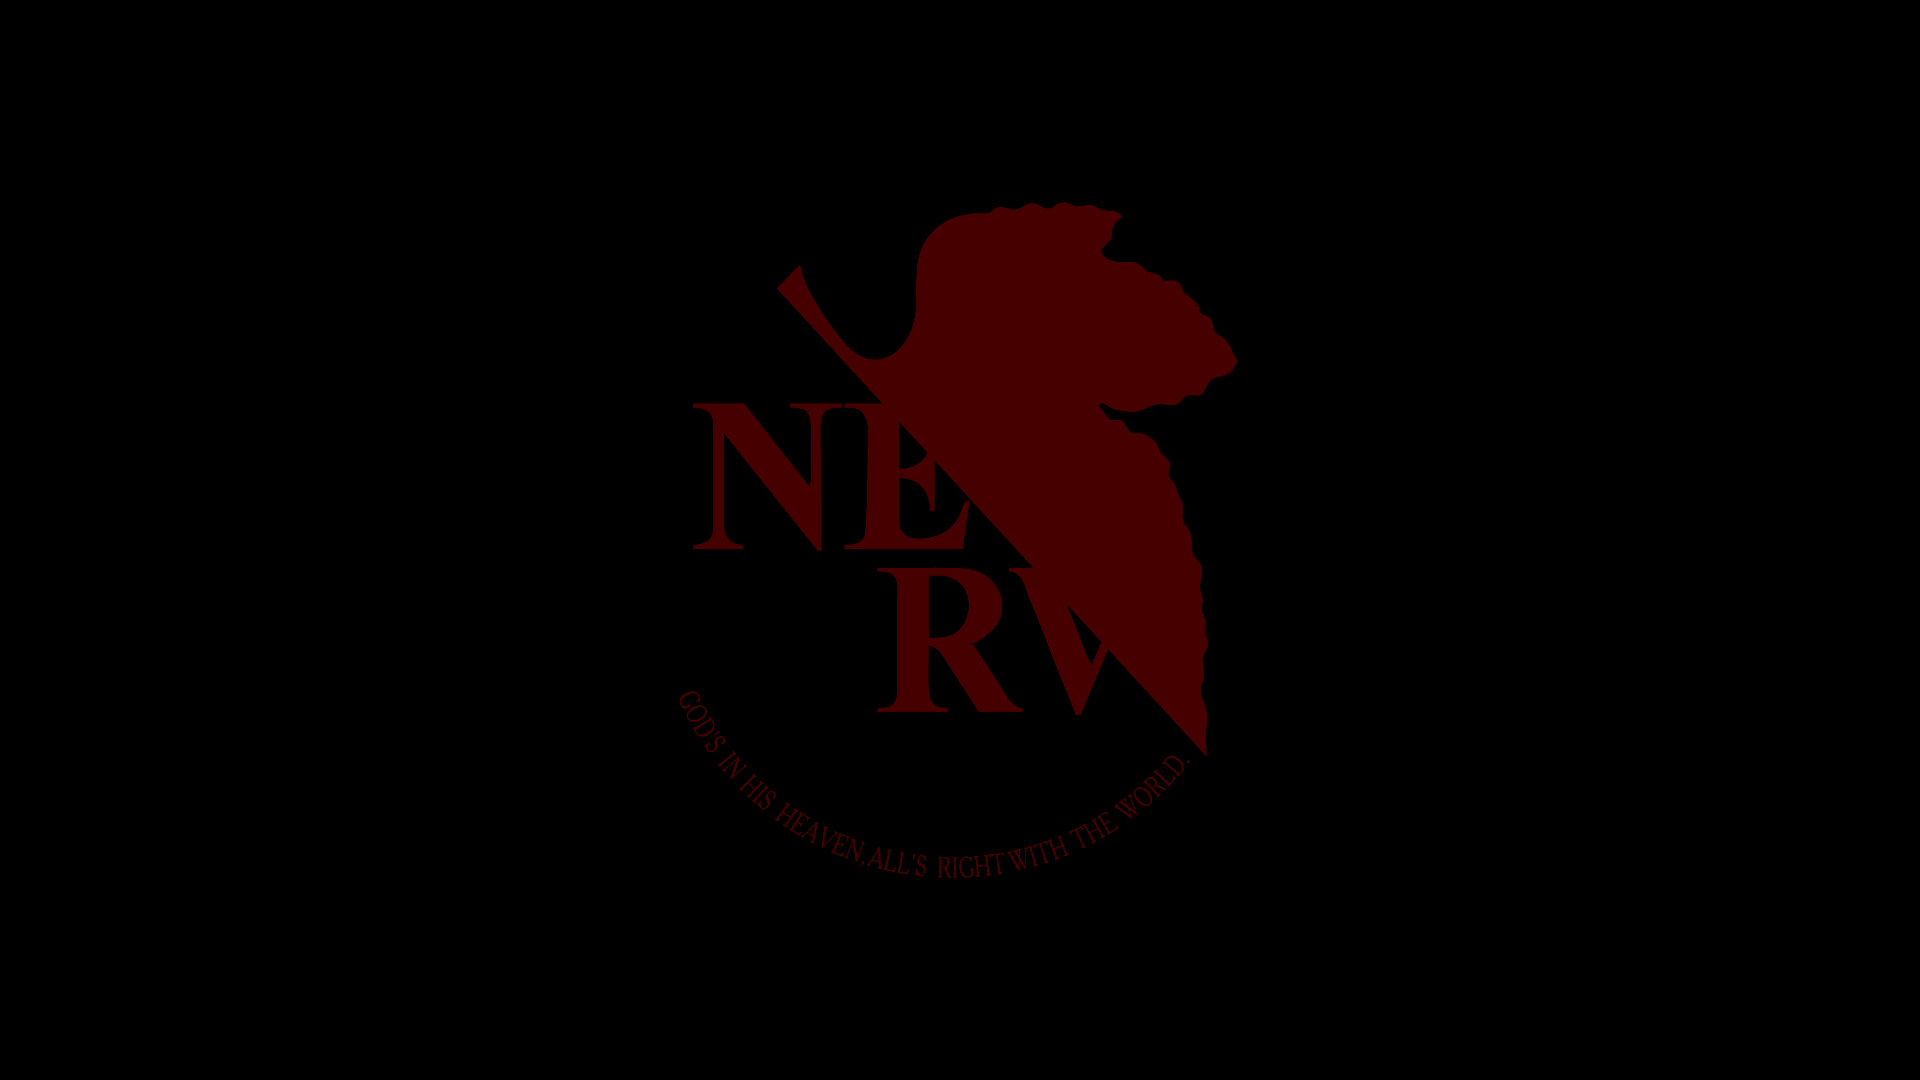 Wallpapers Id Nerv Hd Wallpaper Backgrounds Download